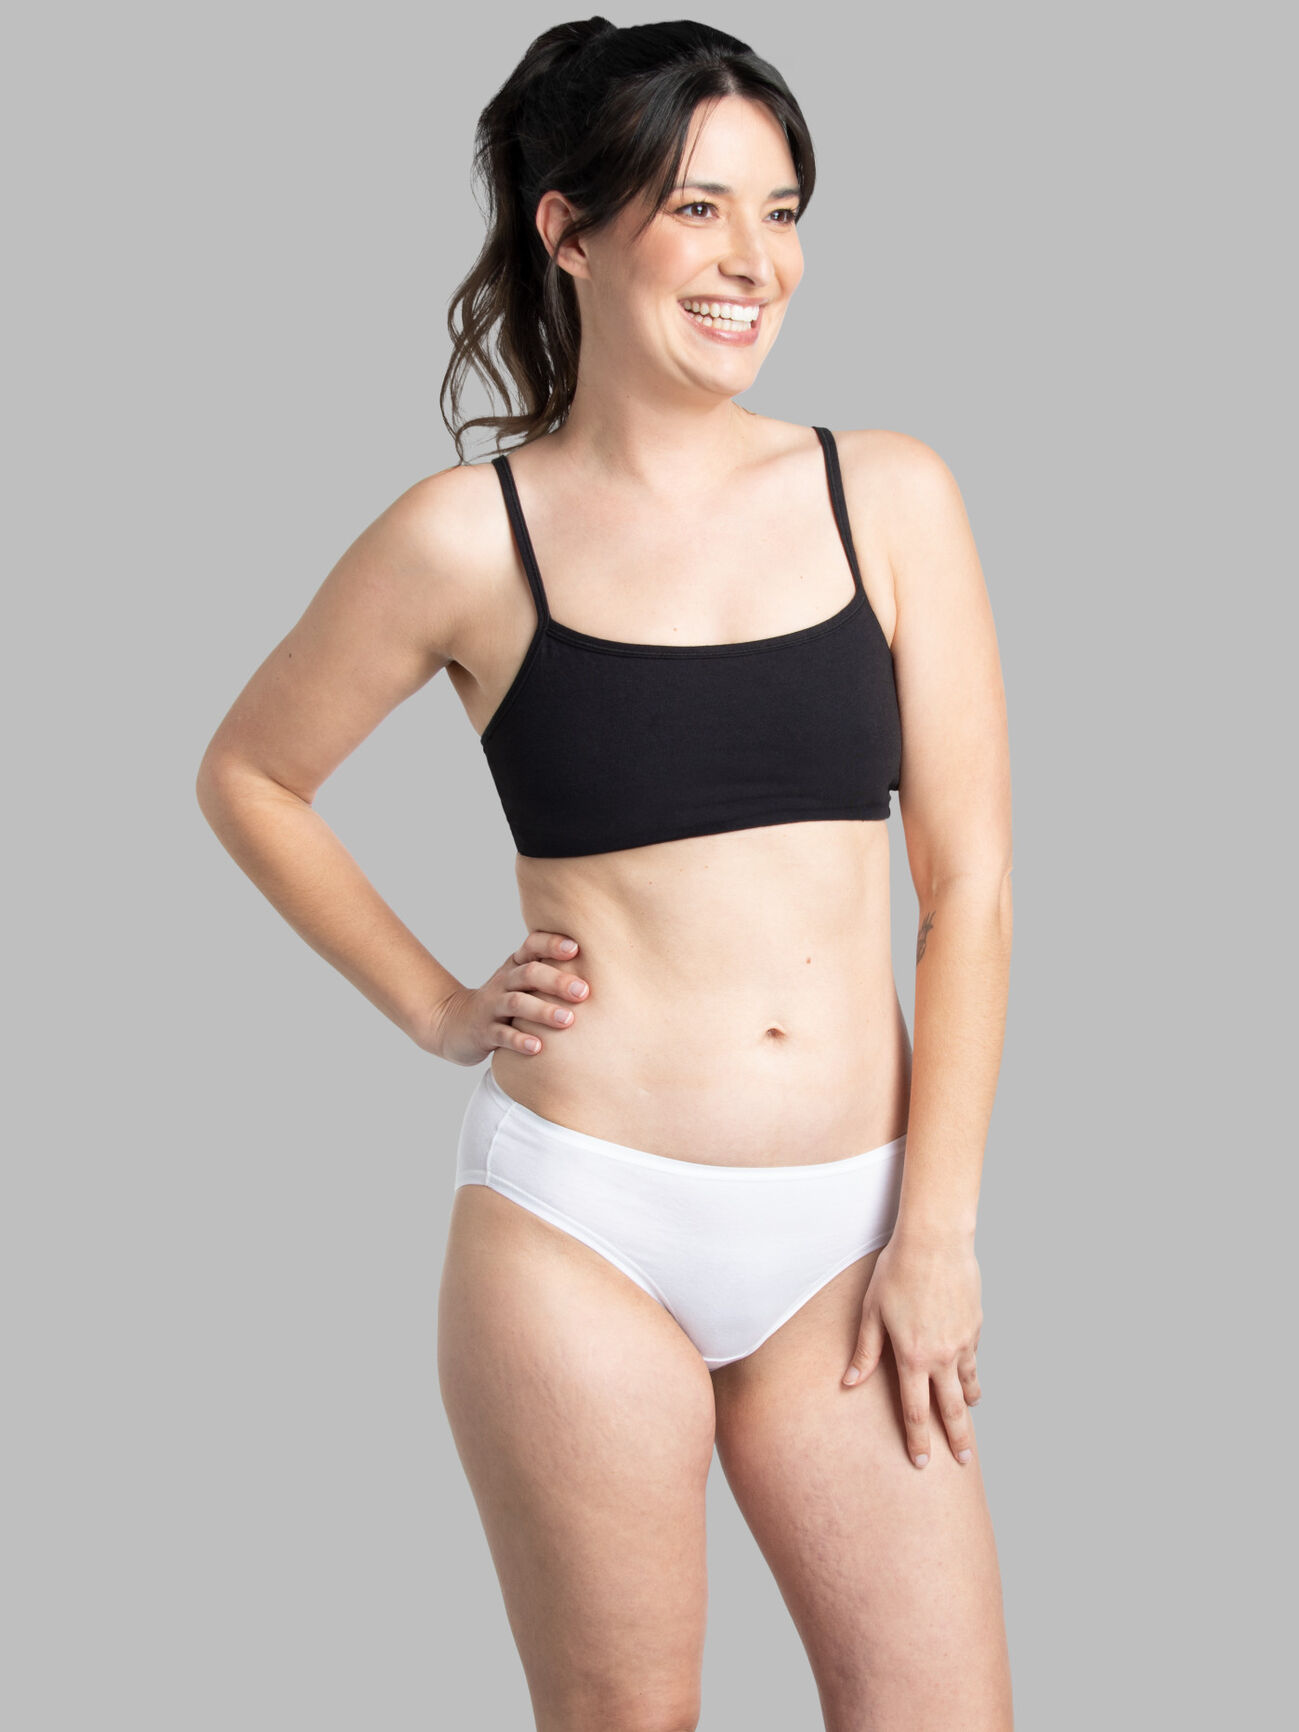 Fruit of the Loom Women's Cotton Stretch Underwear - Comfortable, Soft, and  Perfect Fit